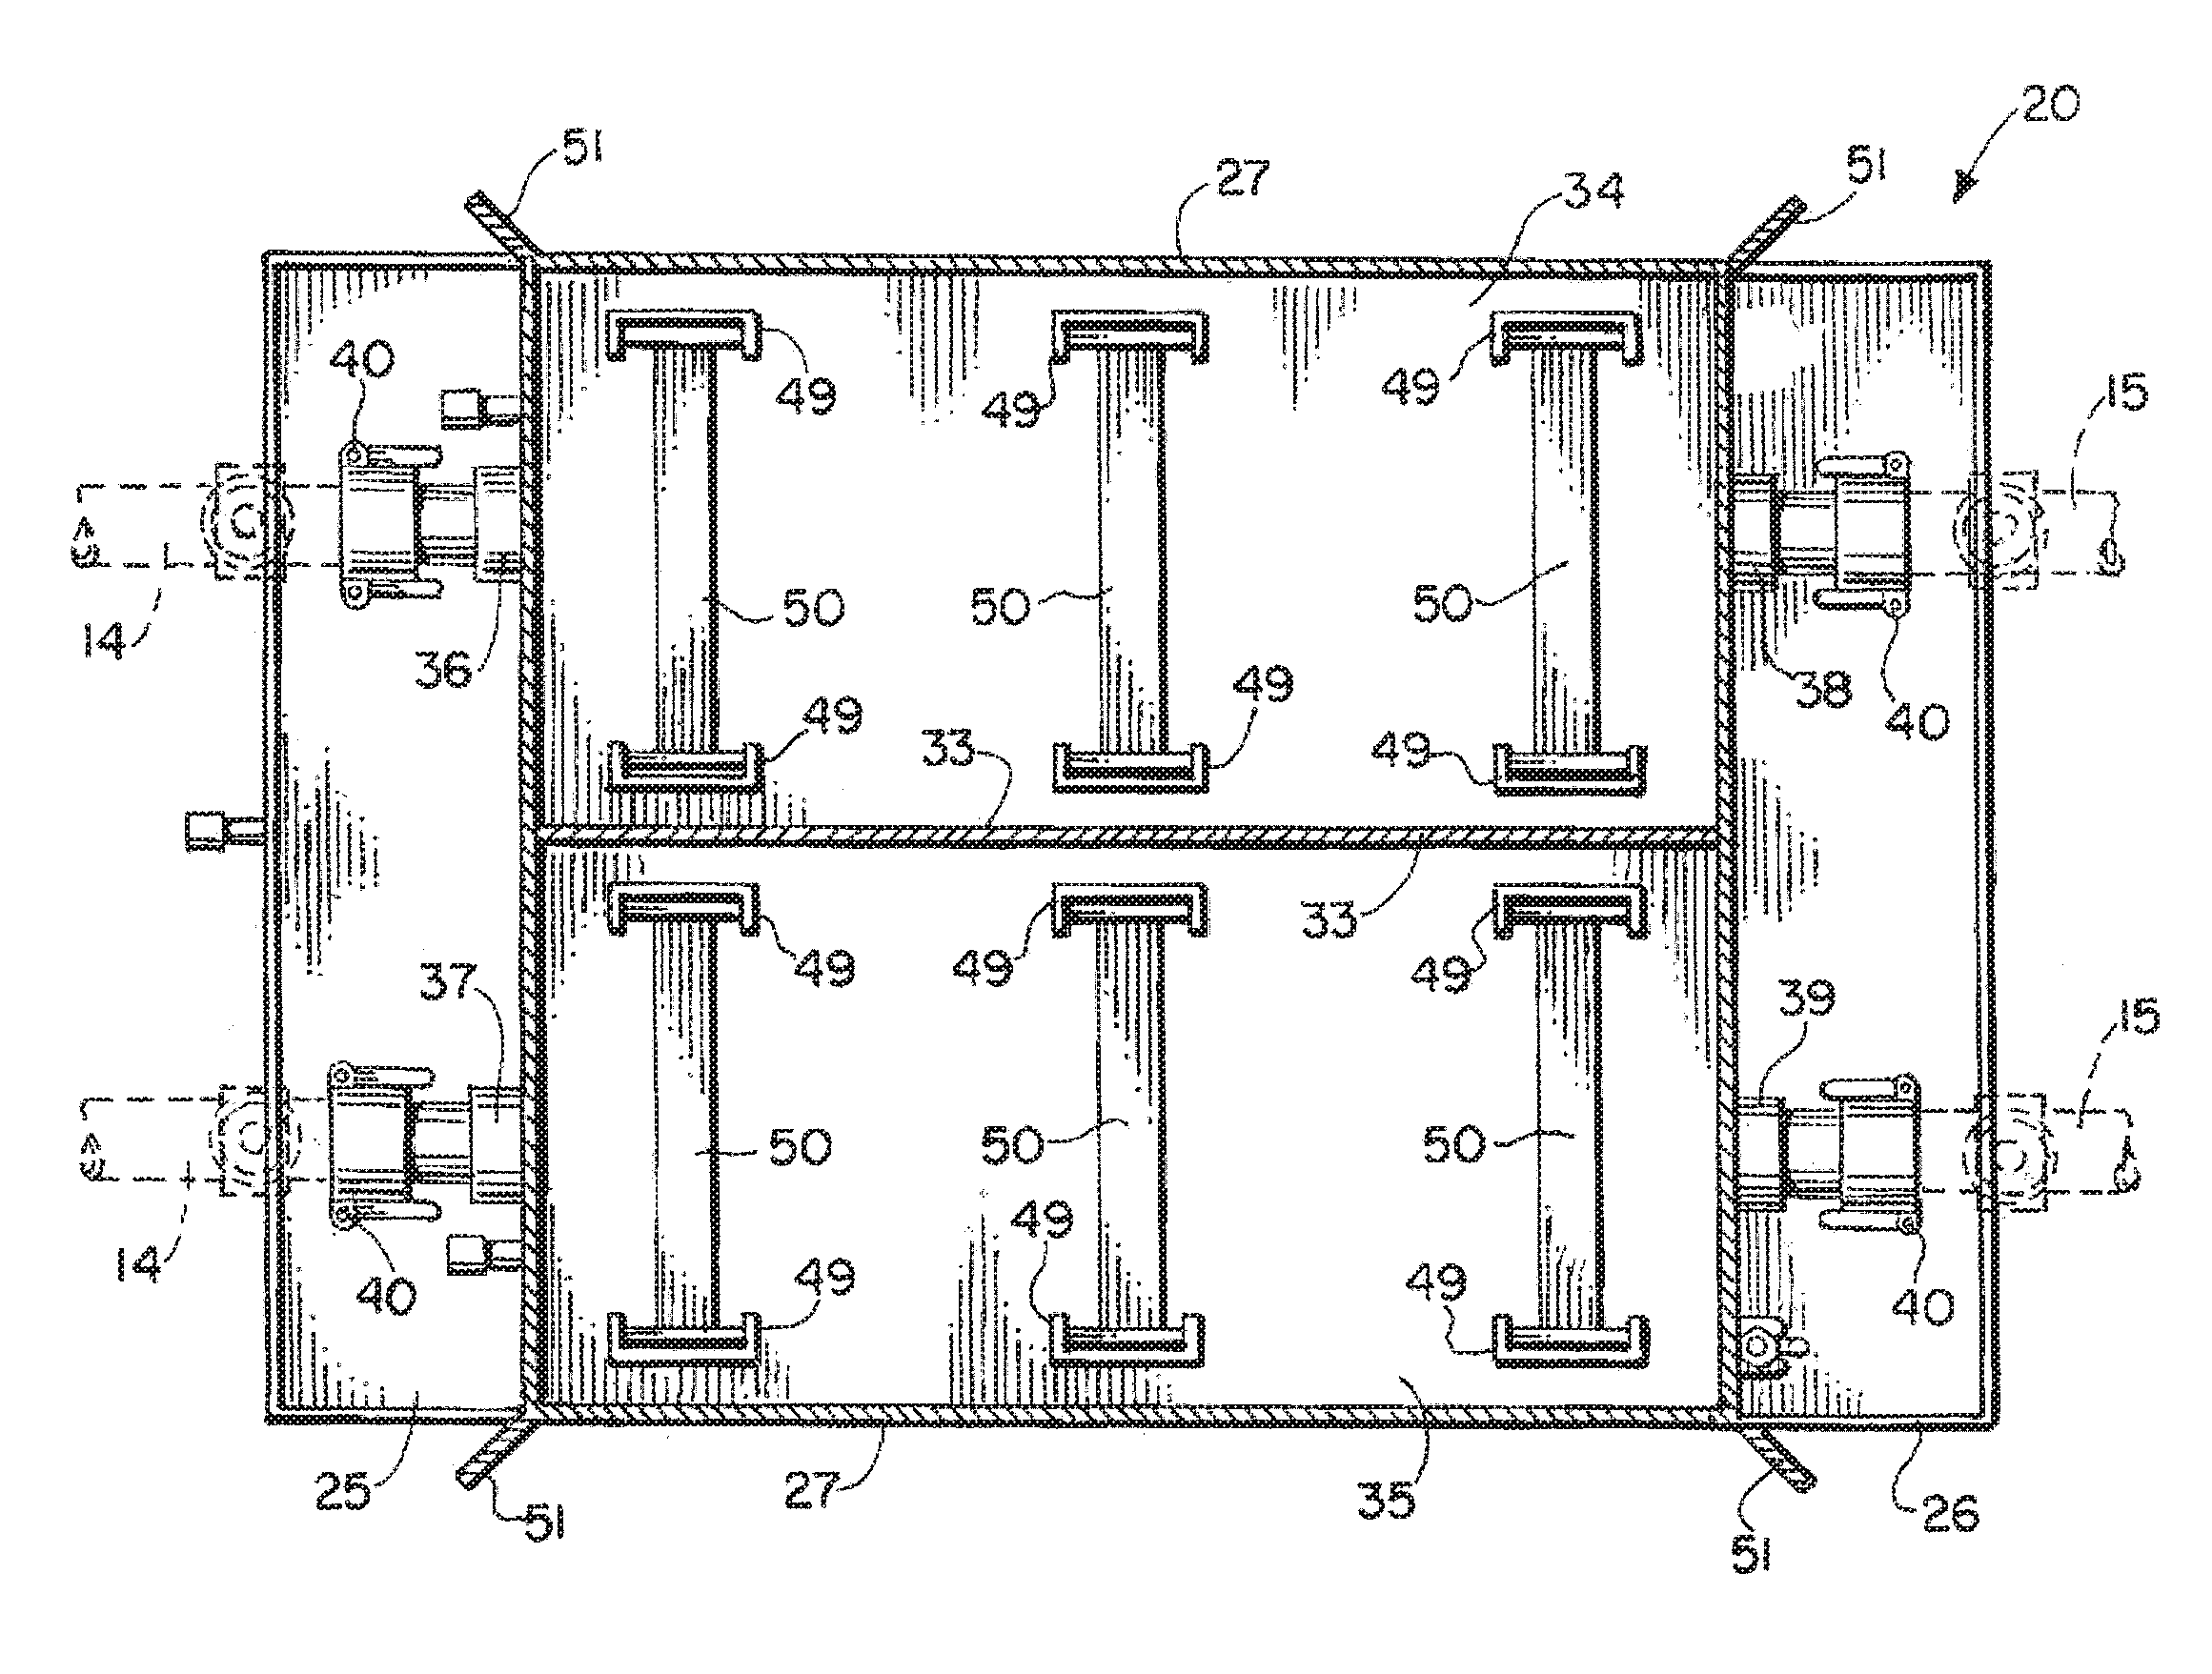 Method and Apparatus for Removing Metallic Matter From an Oil Well Circulating Completion Fluid Stream